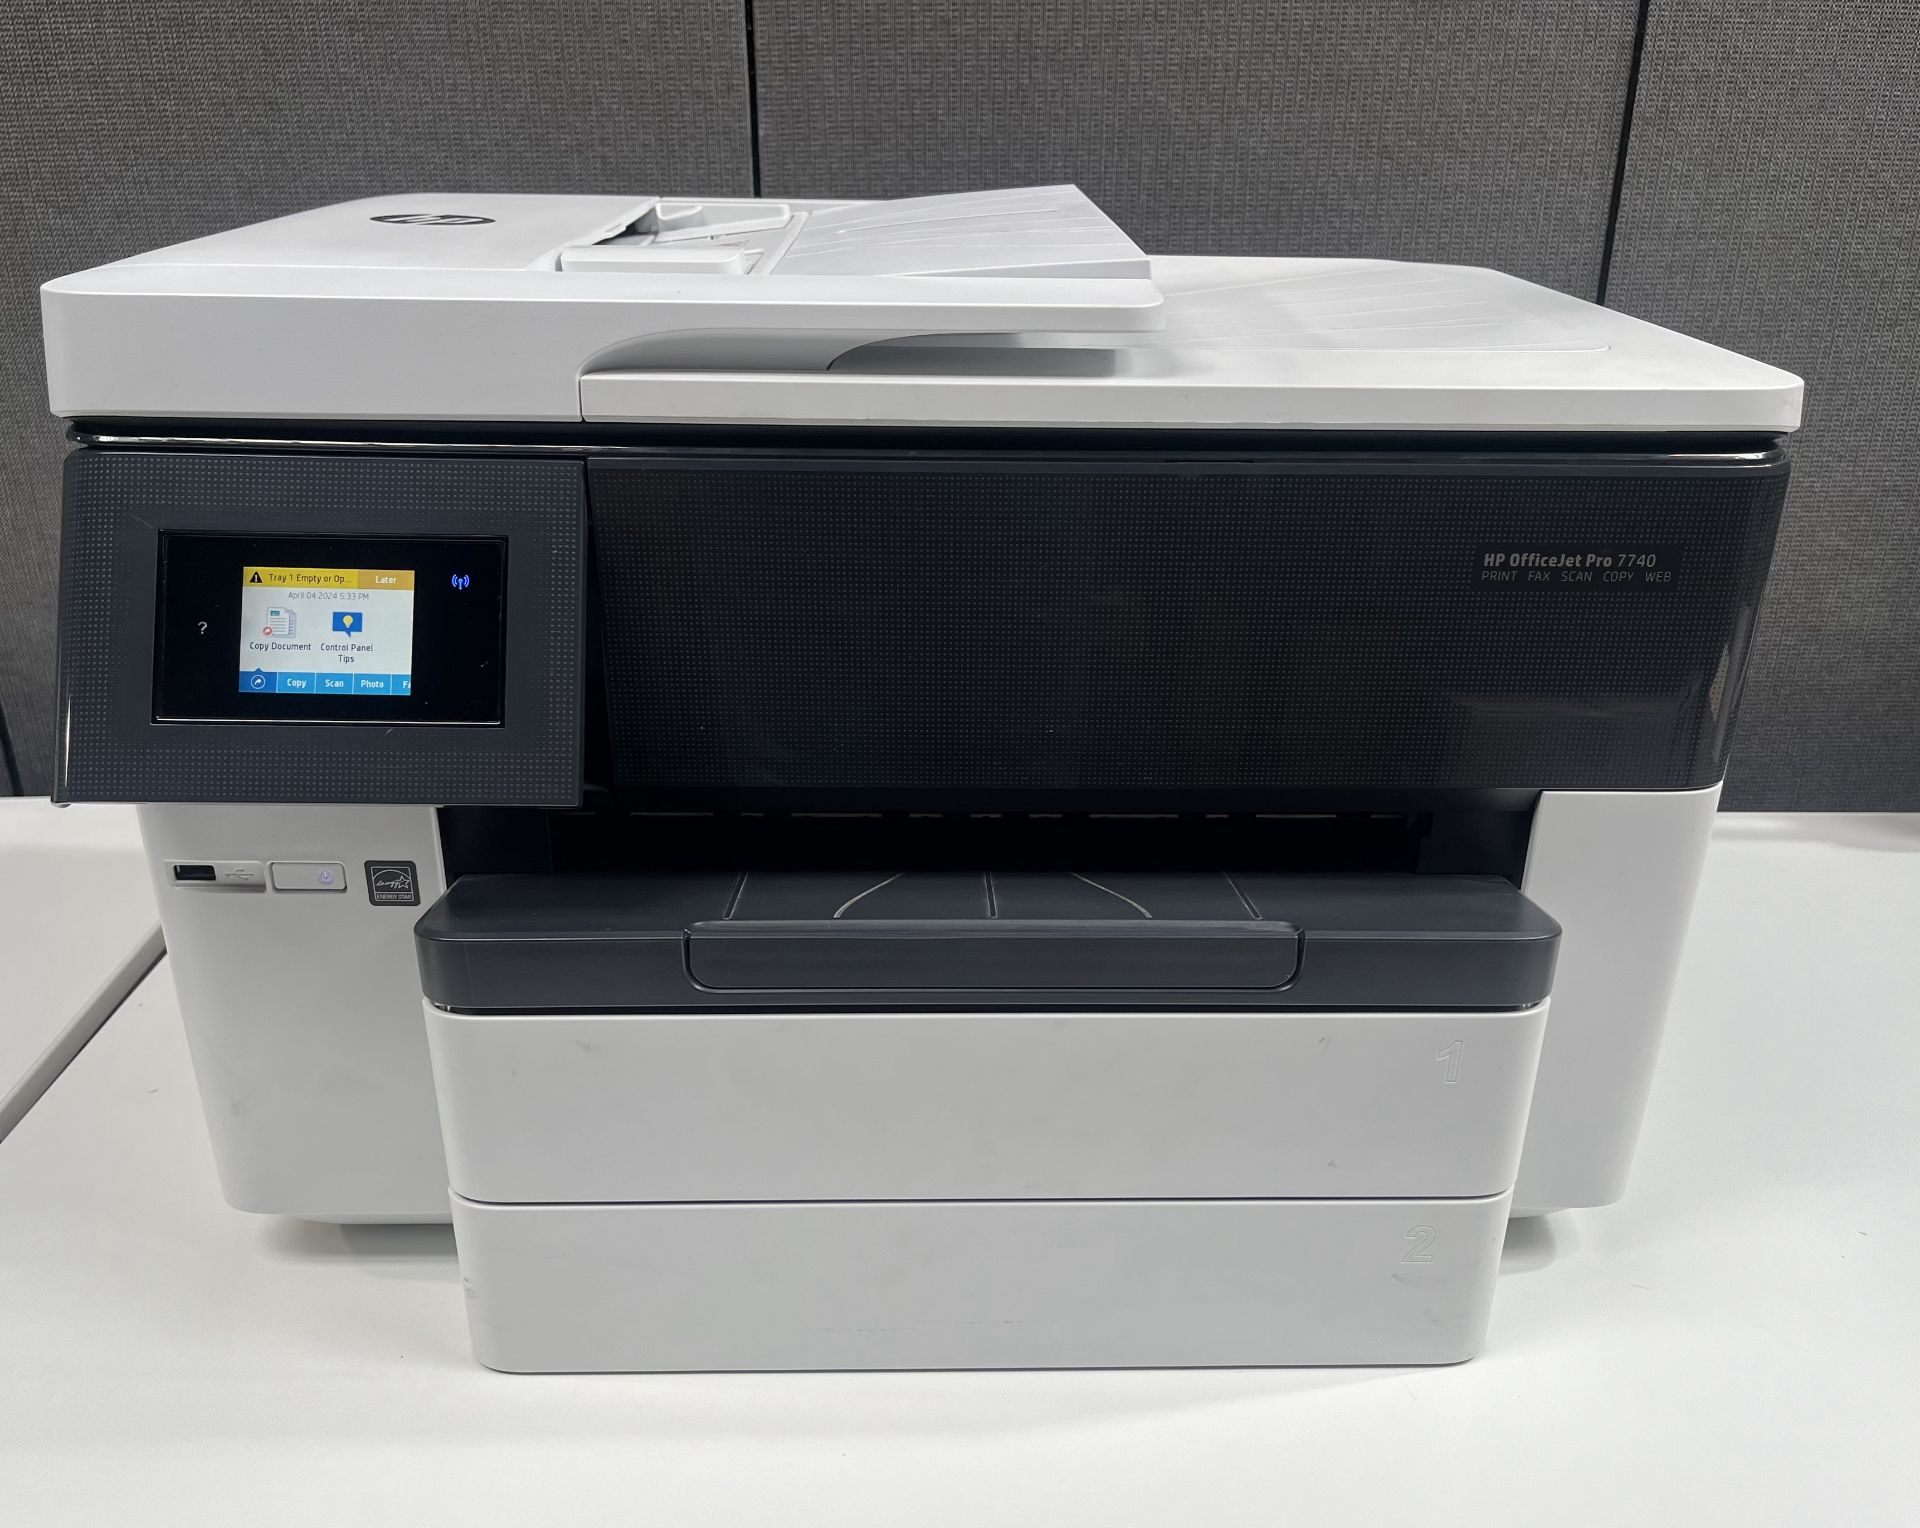 HP OfficeJet Pro 7740, Inkjet Print - Scan - Copy, per customer excellent-fully functional